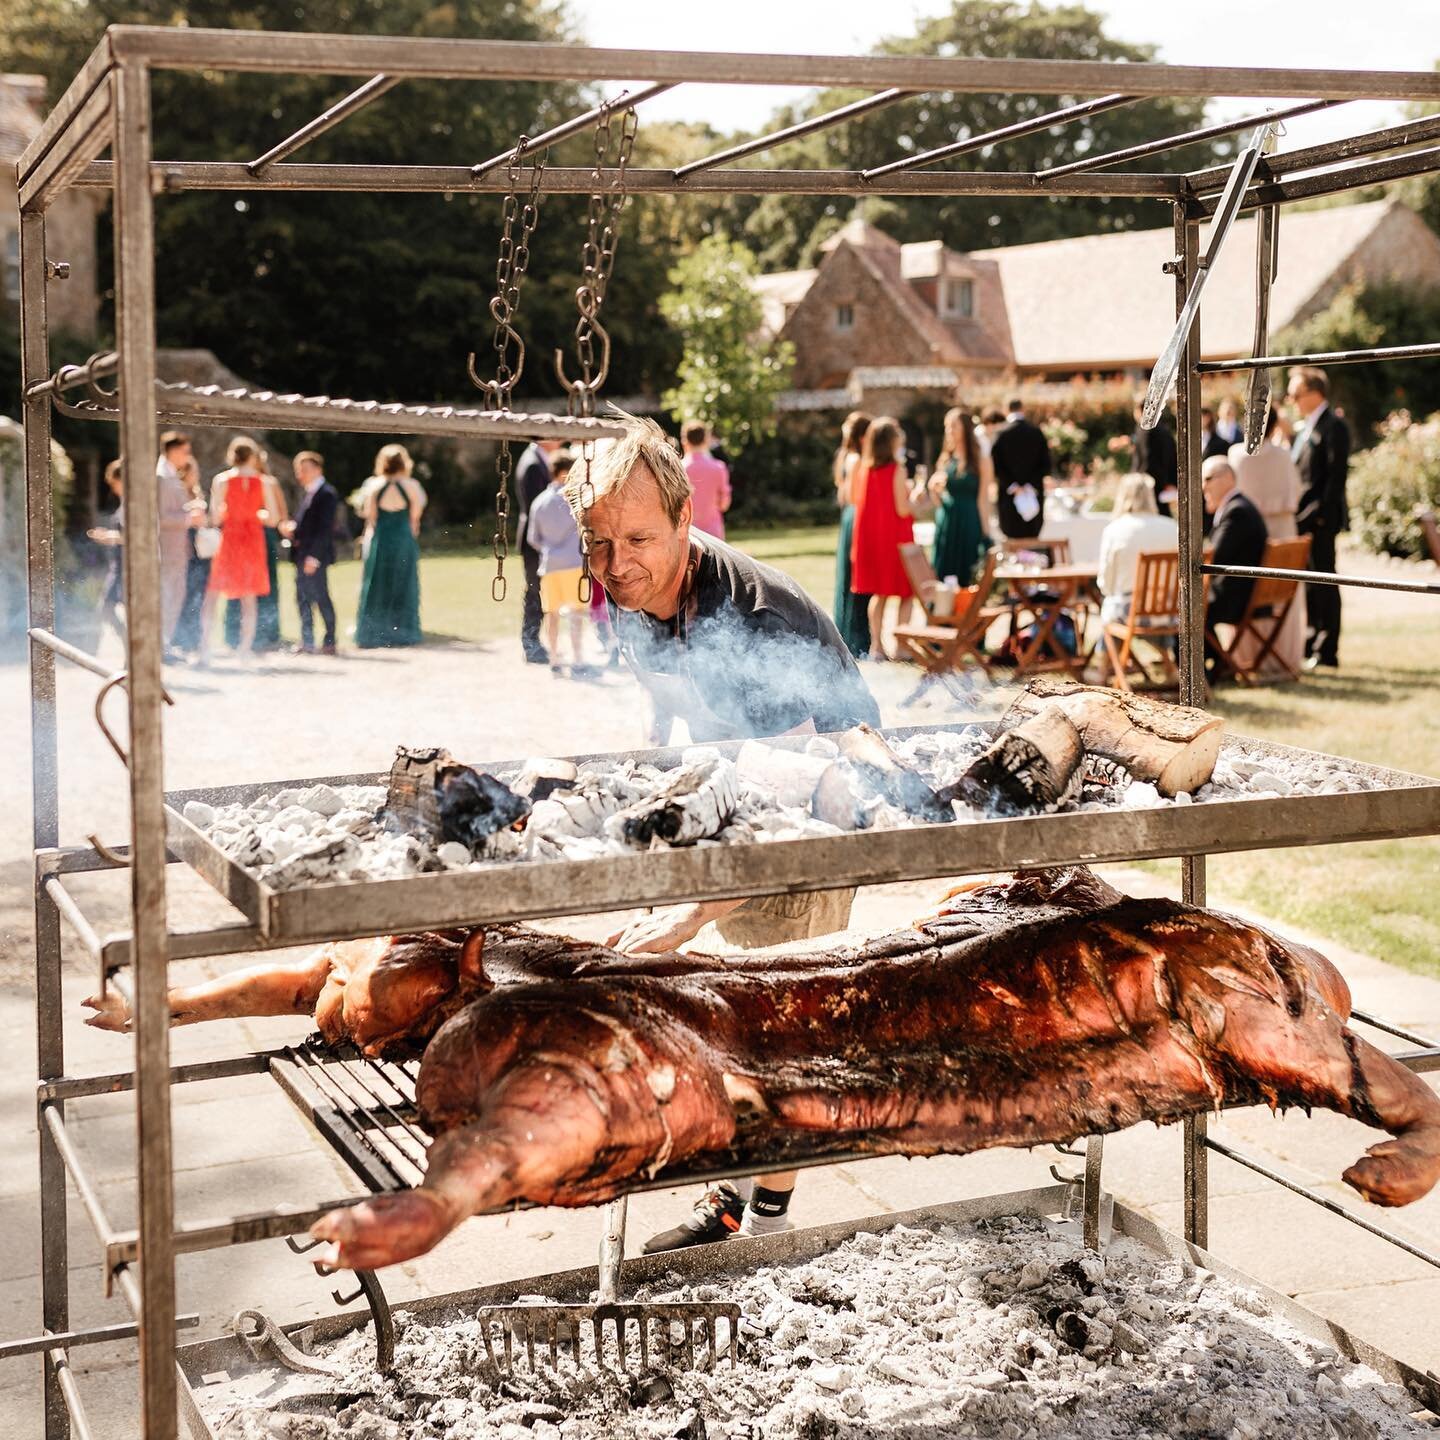 A memorable wedding from this year for Seb &amp; Aisling, just as the restrictions were lifted. I can&rsquo;t tell you how excited I was to be cooking for large numbers again! 

This pig was so heavy it wouldn&rsquo;t fit on the asado cross. So we de